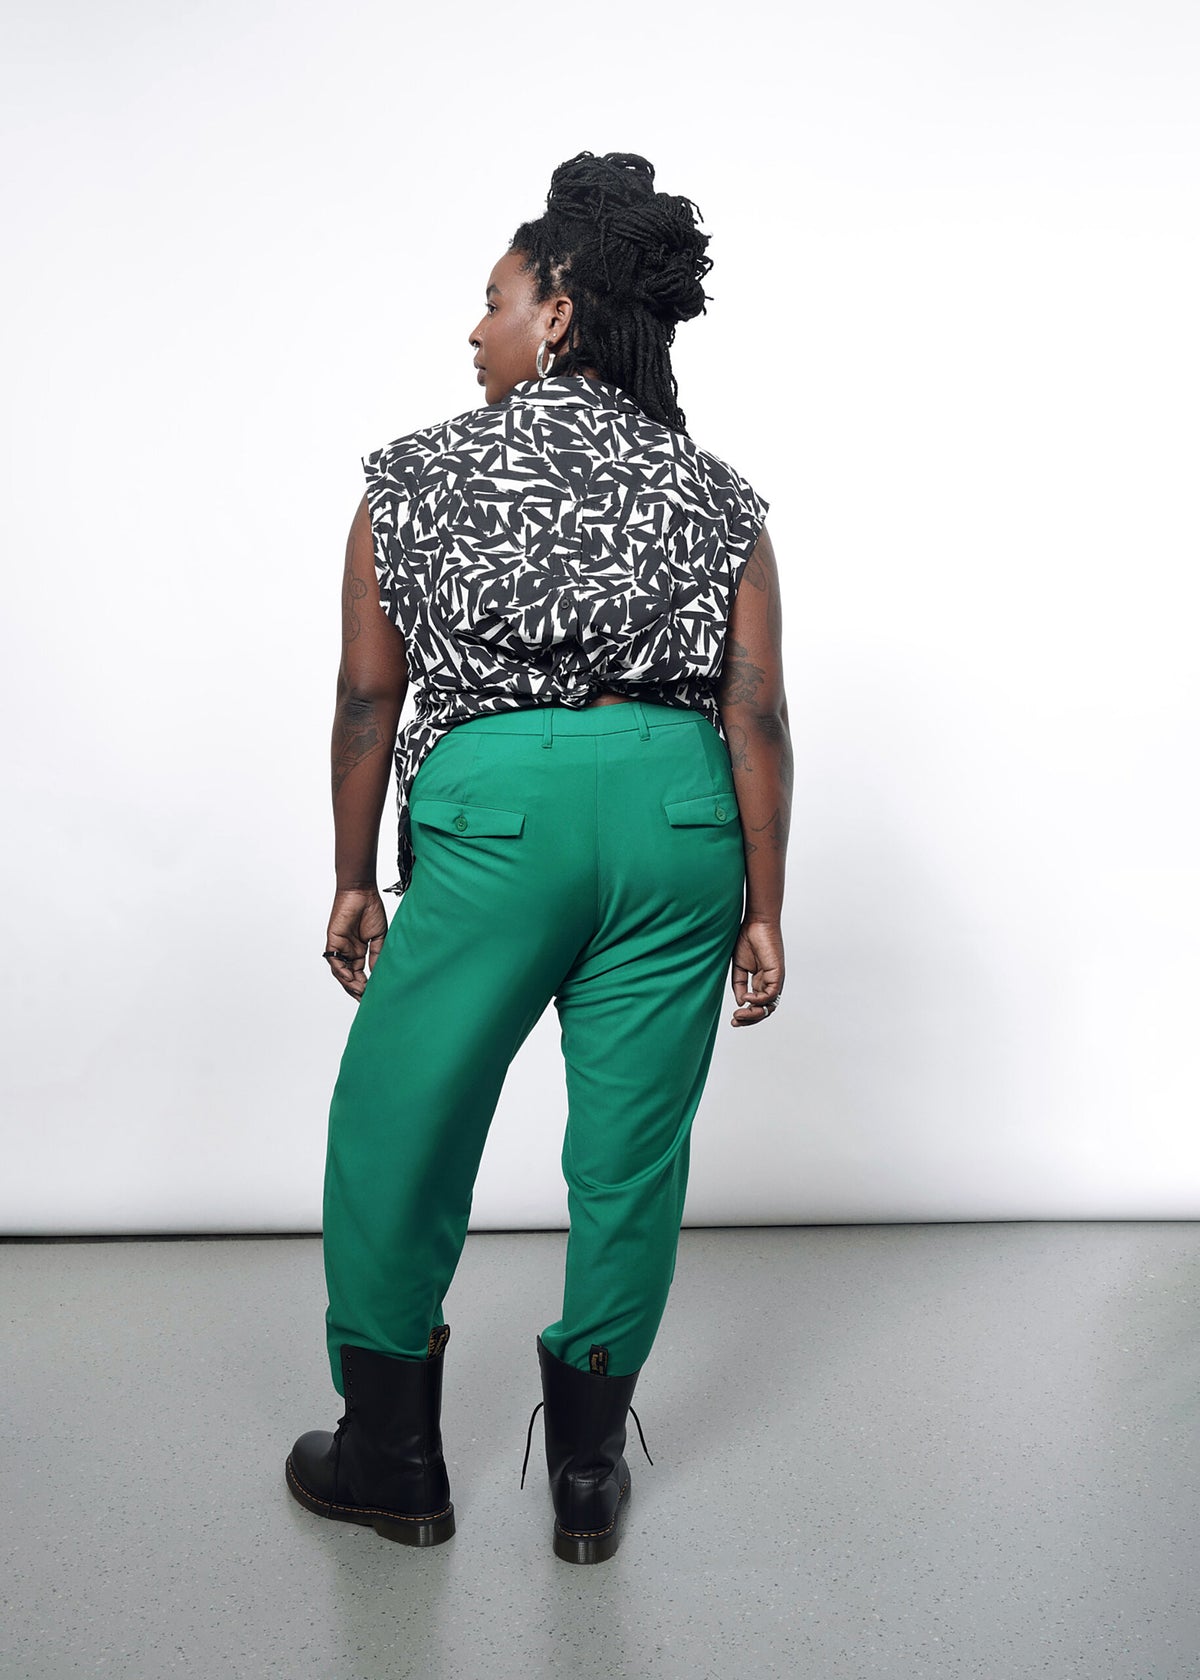 The Empower Trouser in Emerald